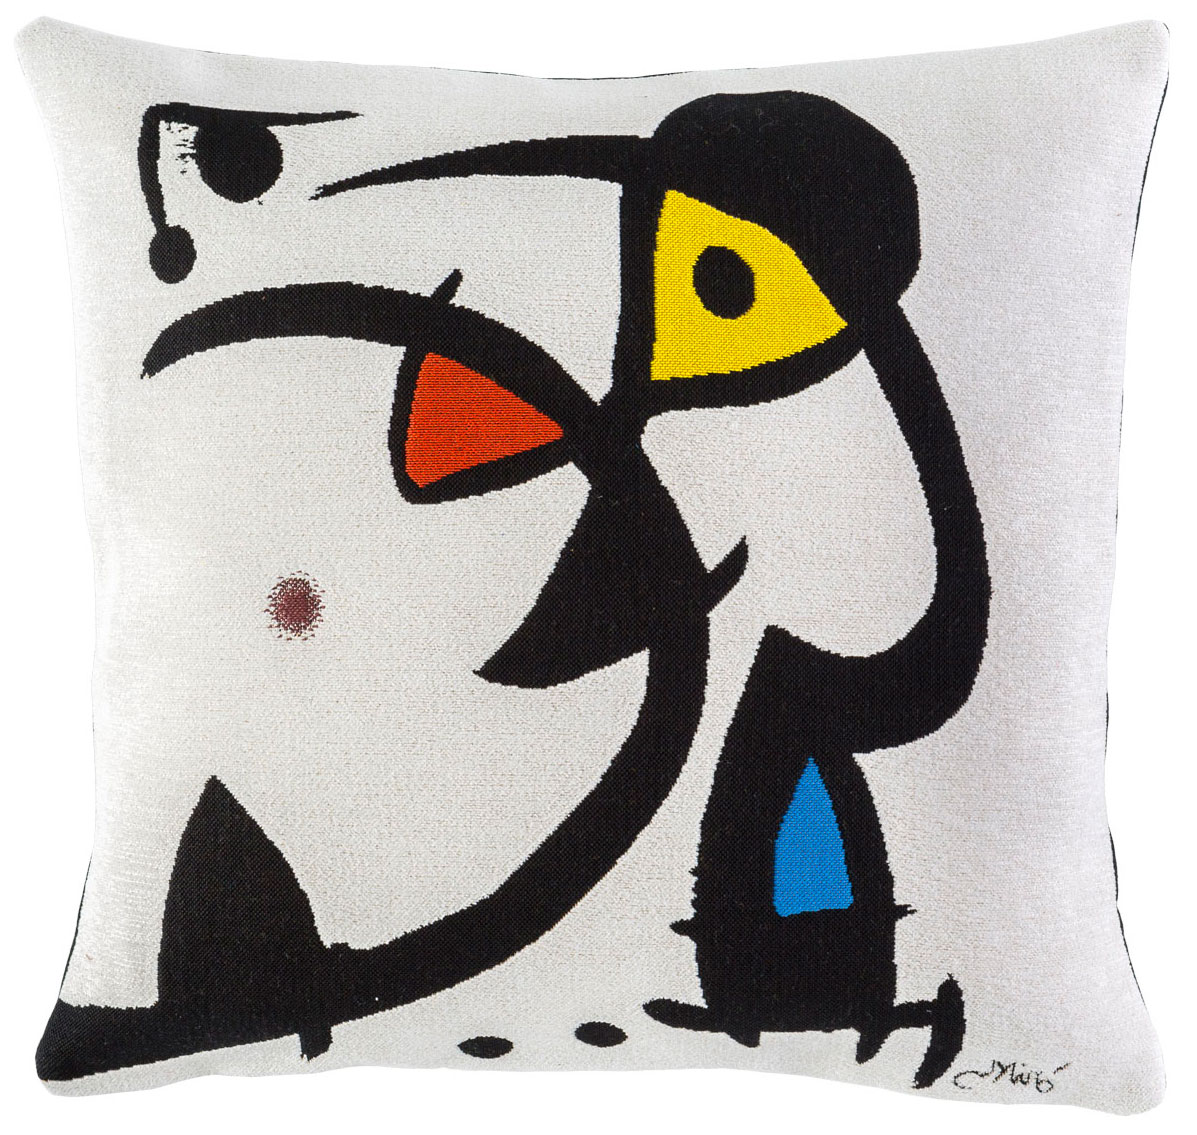 Cushion cover "Two Characters Persecuted by a Bird" (1976) by Joan Miró